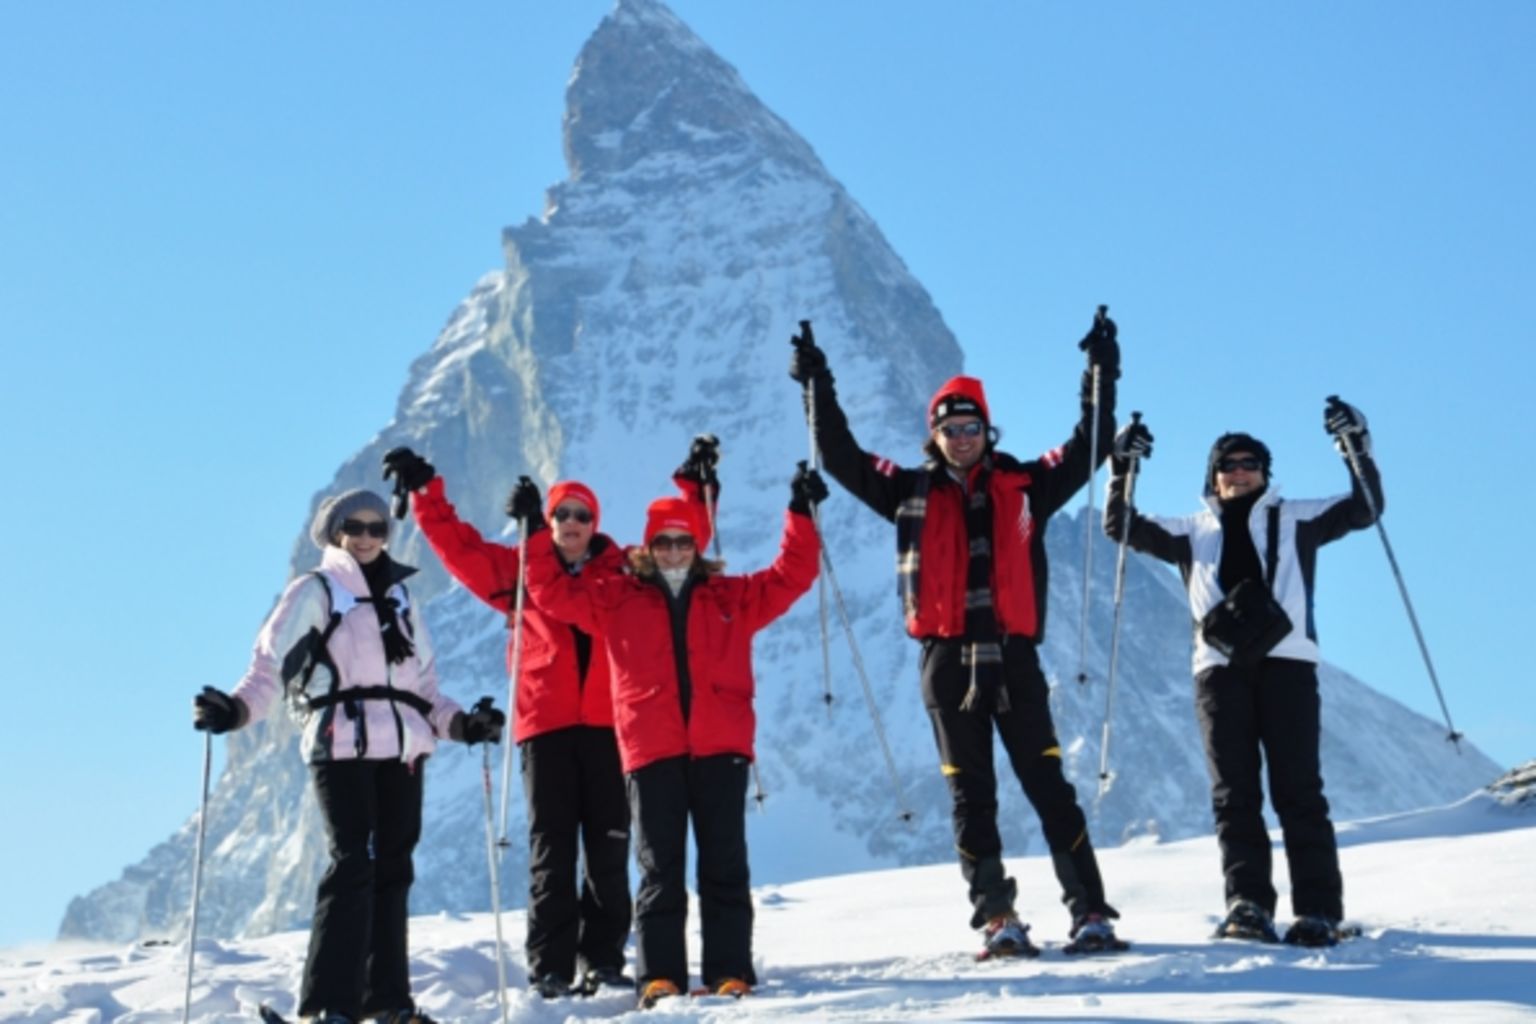 Zermatt Event Management organizes for you, your employees, your clients or business partners unforgettable events in Zermatt and surroundings, Valais